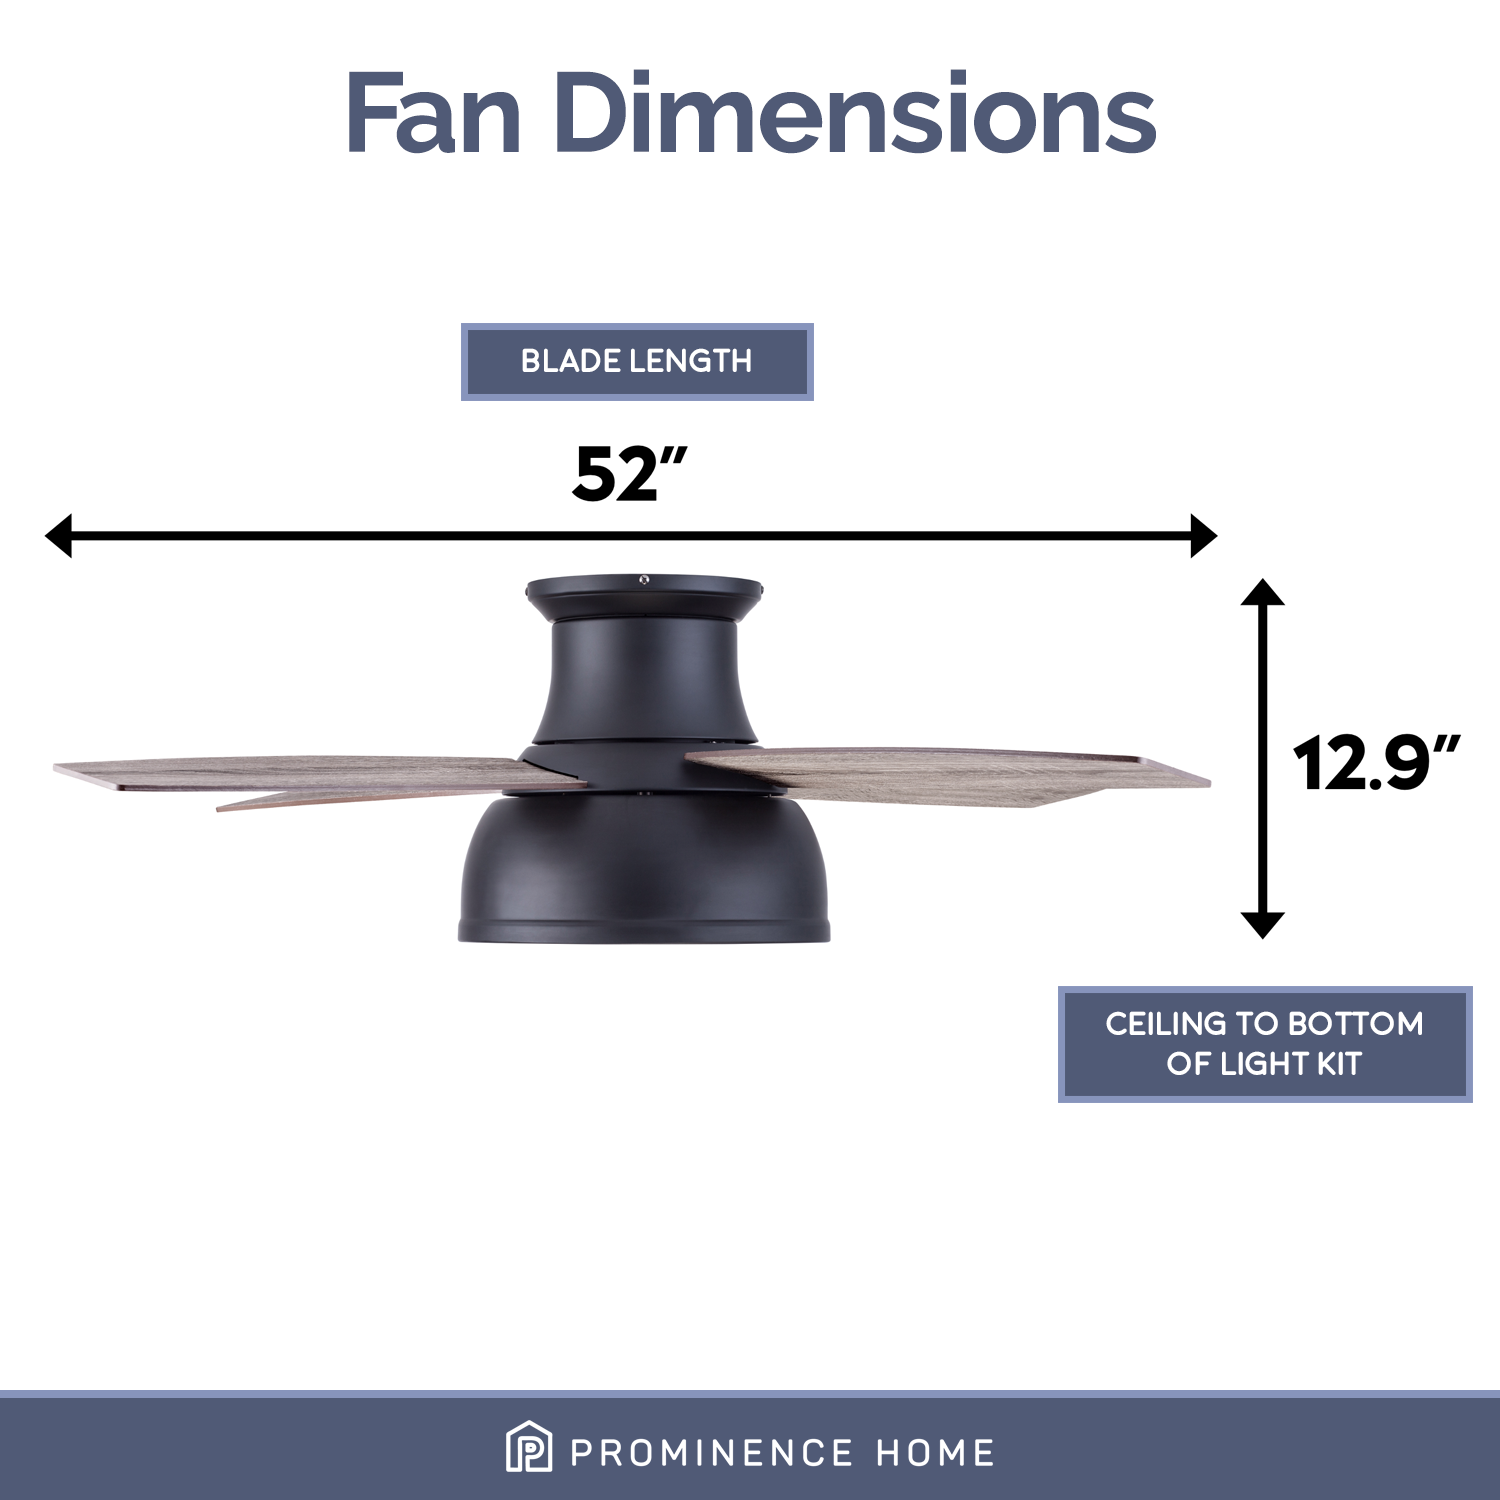 52 Inch Edora, Matte Black, Remote Control, Ceiling Fan by Prominence Home